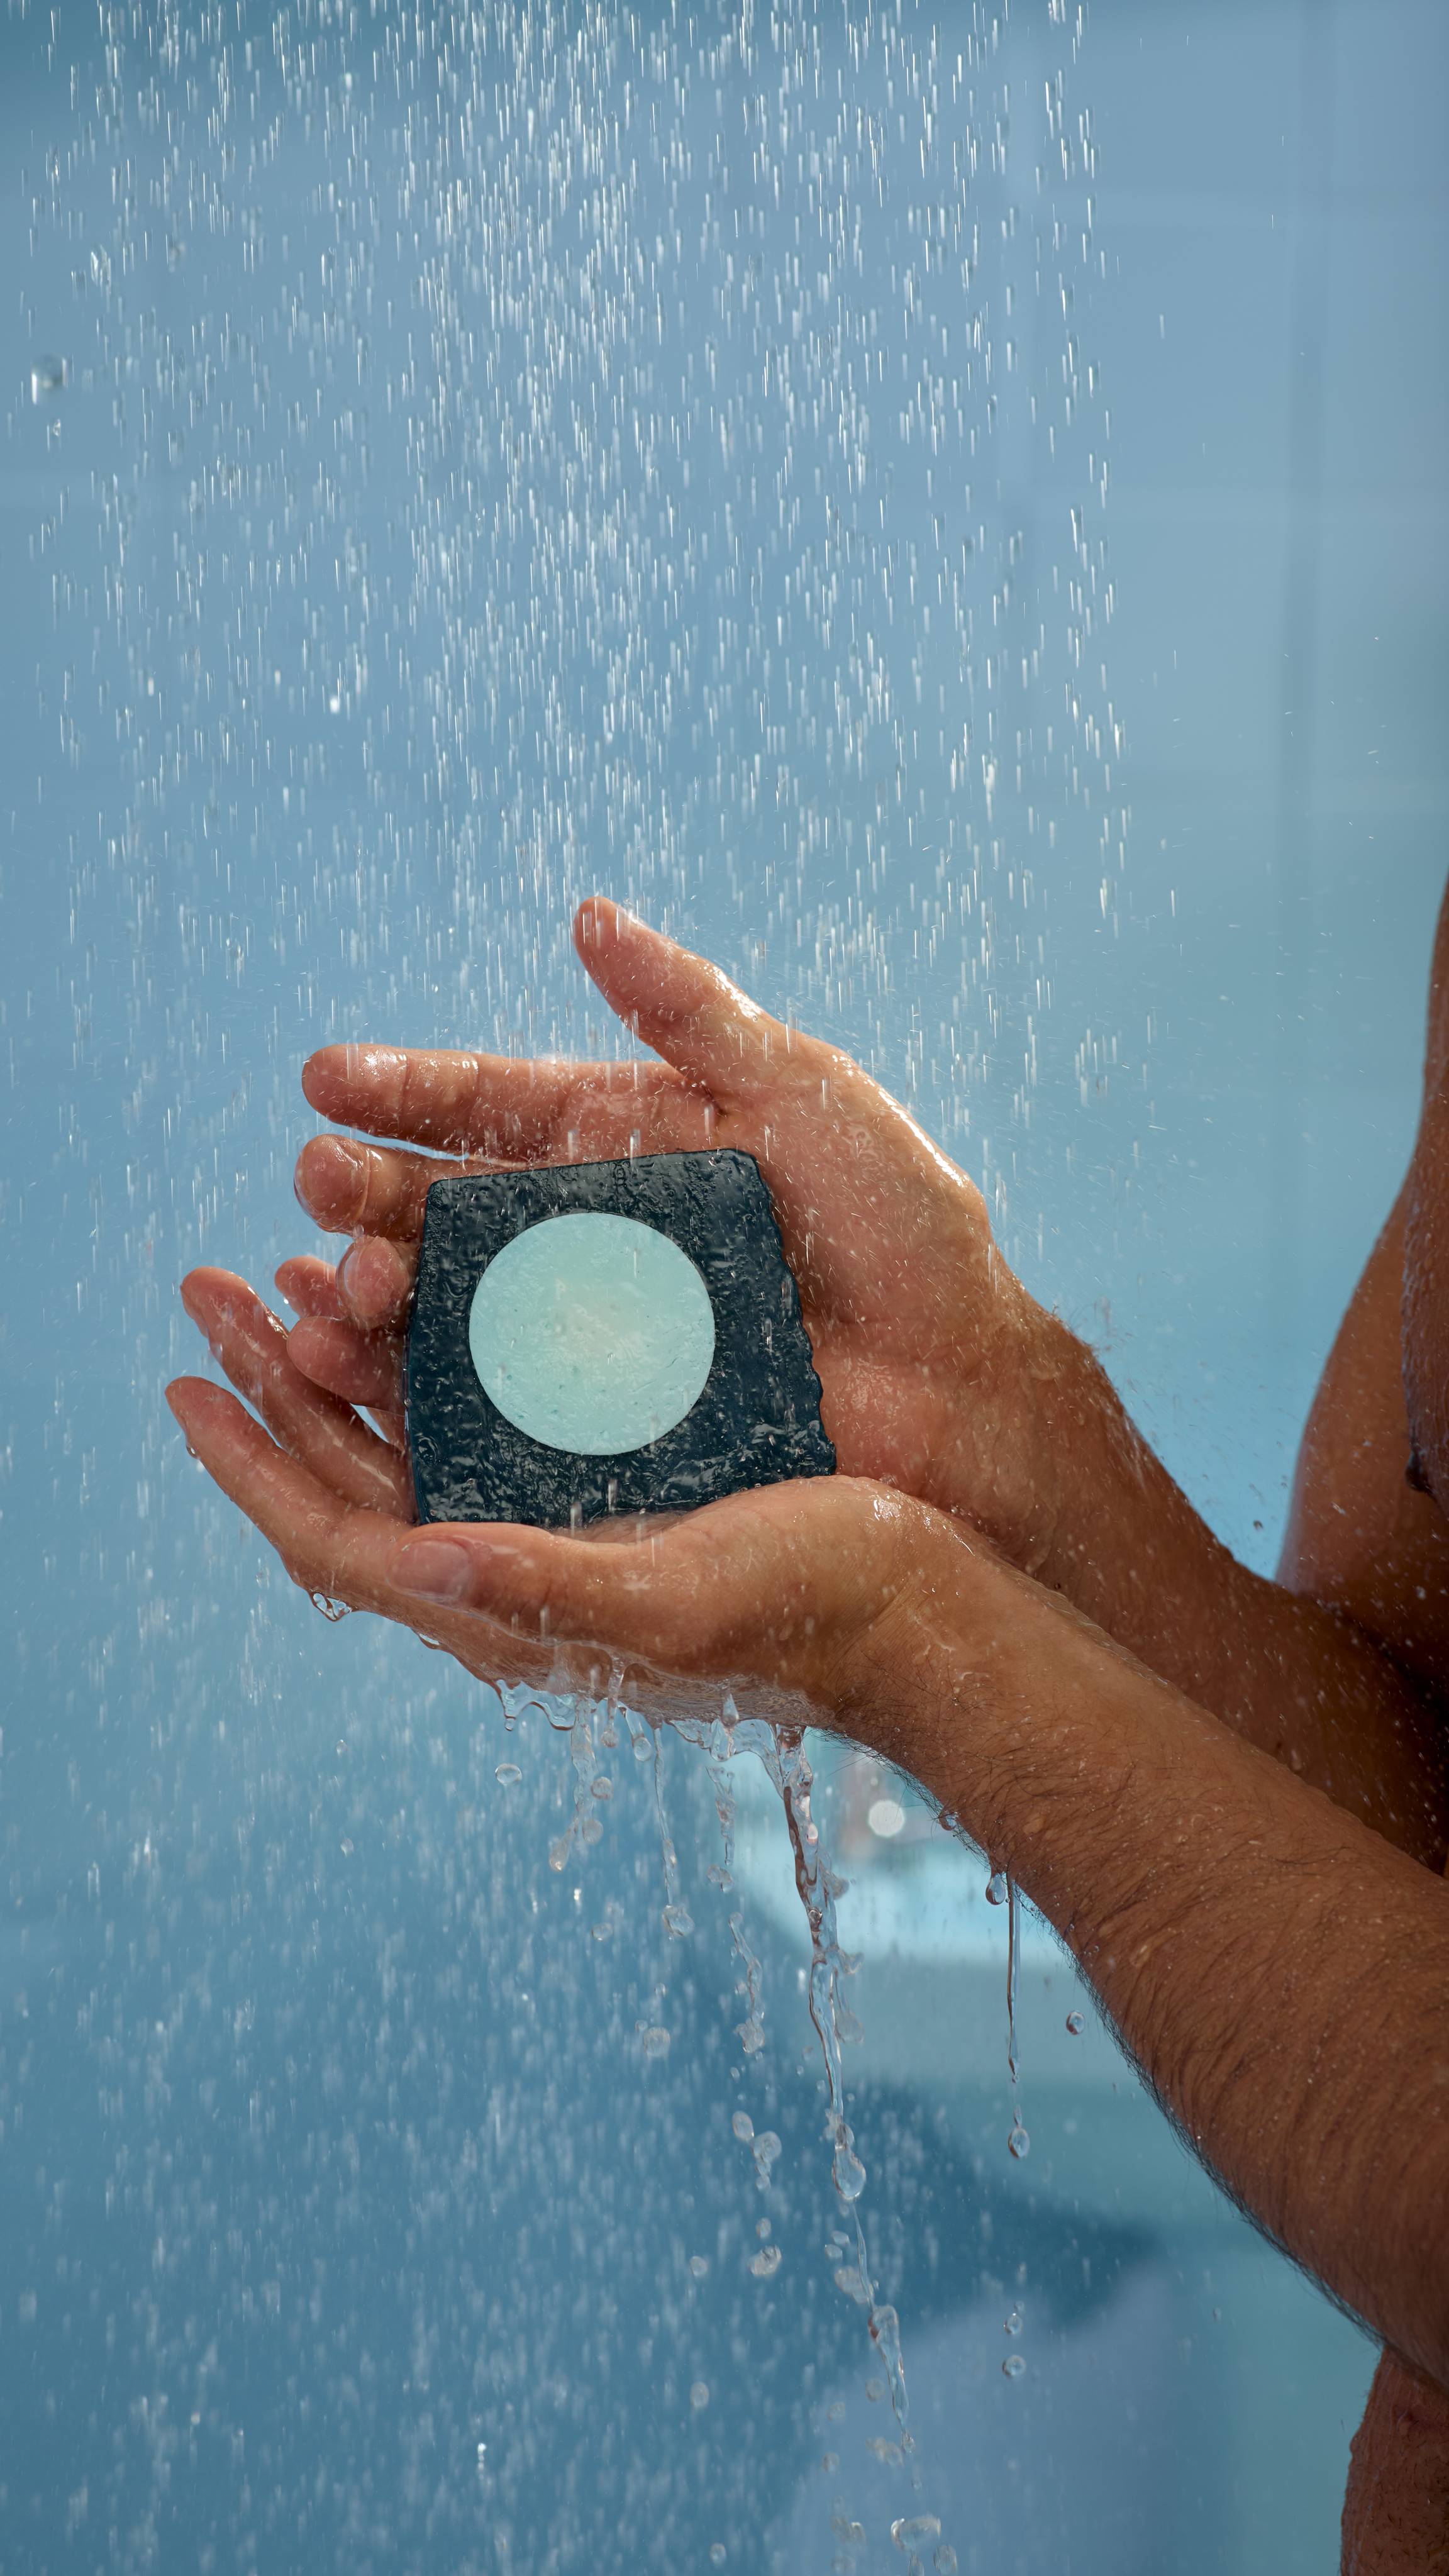 A close-up image of both of the model's hands gently holding the soap underneath running shower water. 